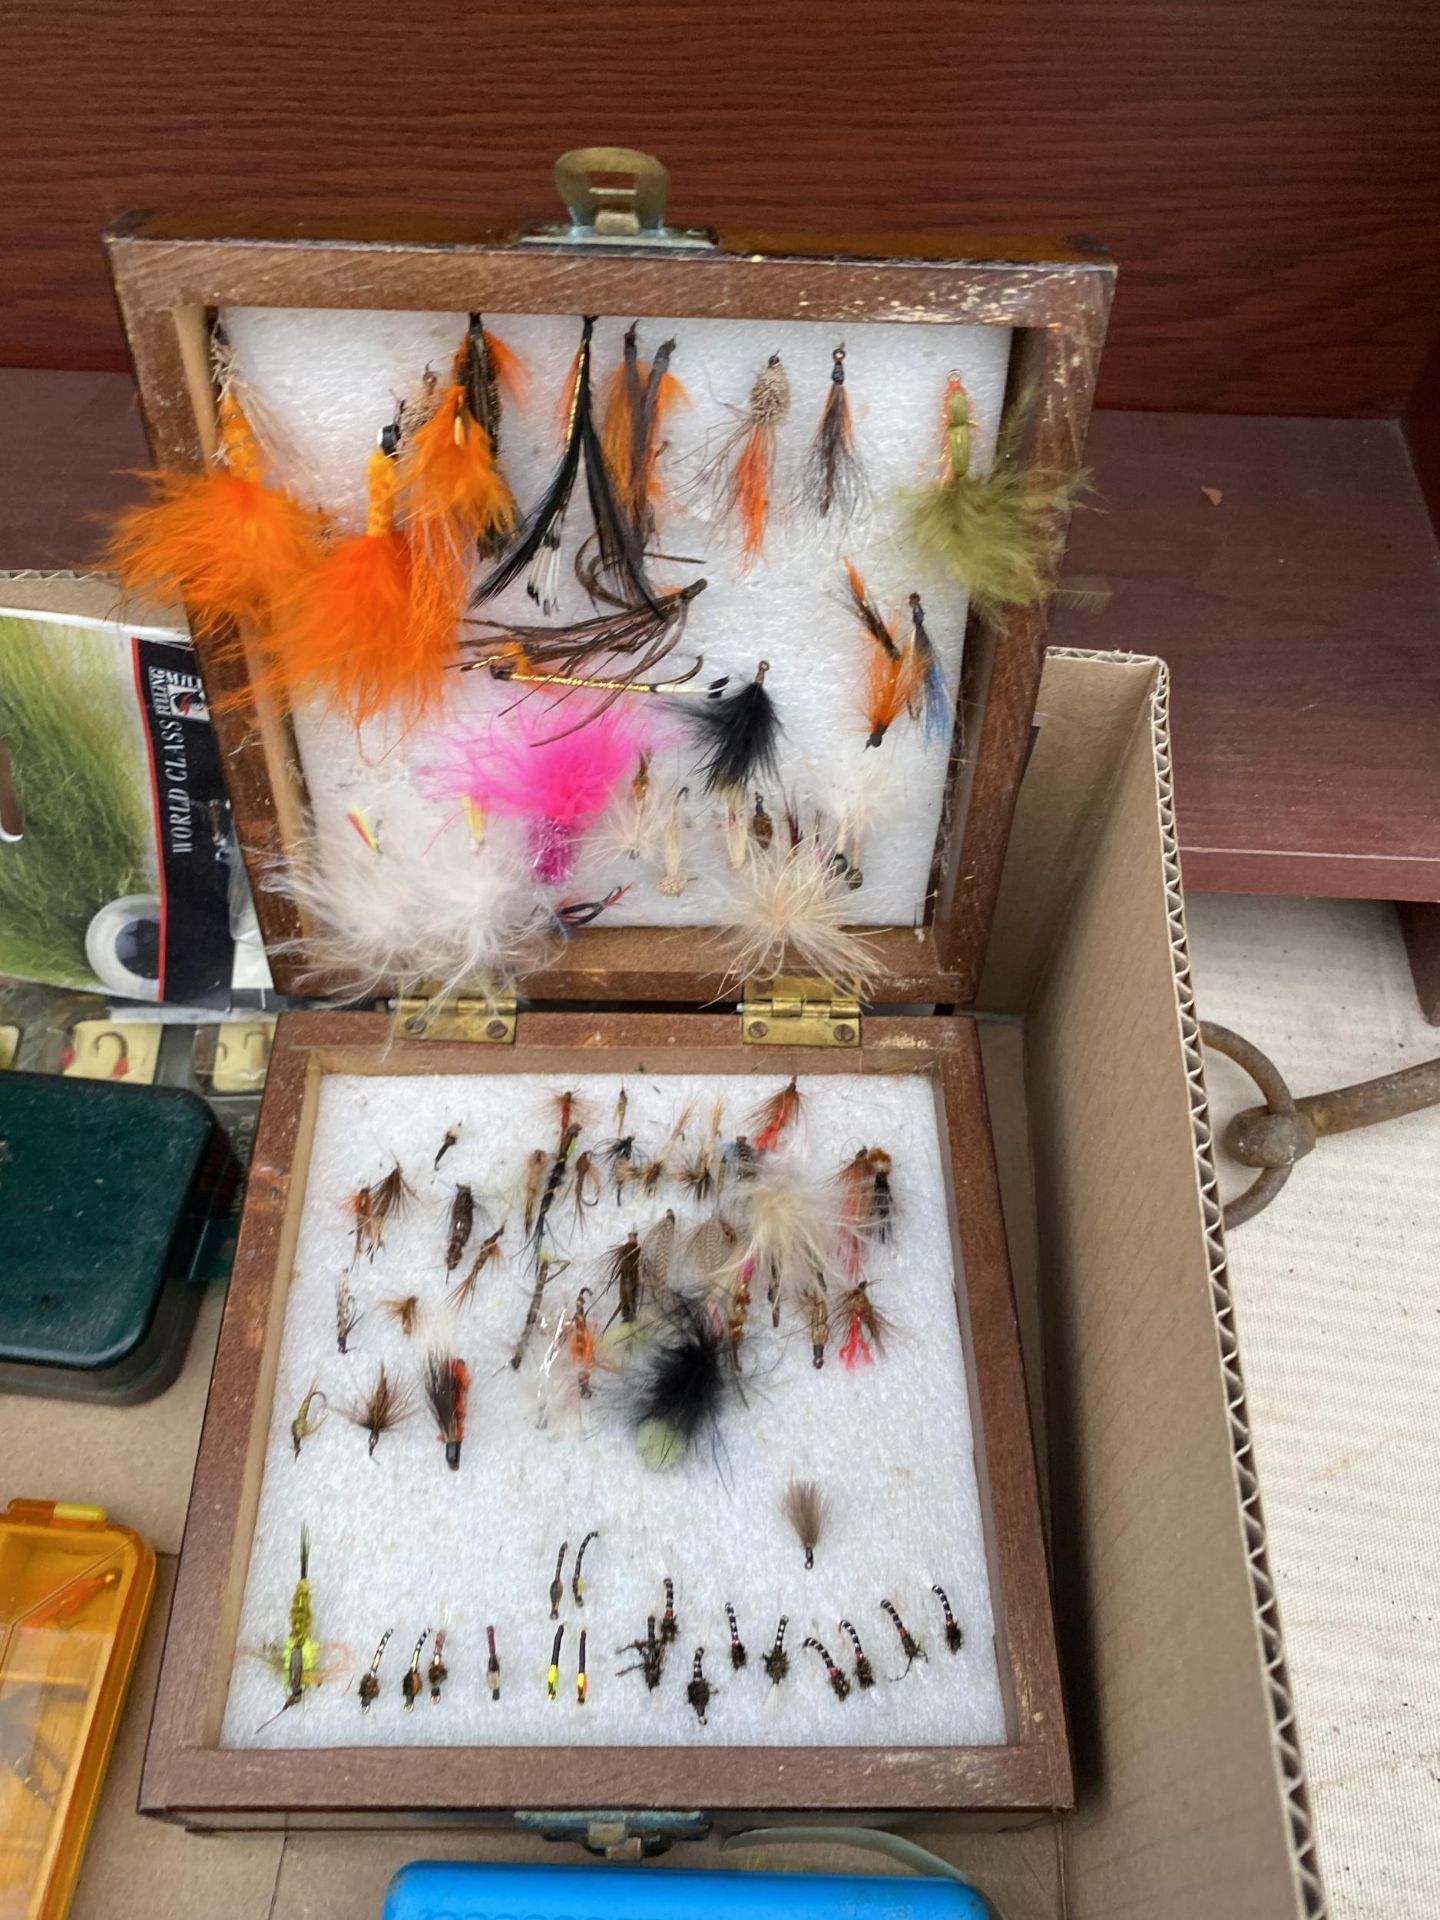 A LARGE SELECTION OF VARIOUS FISHING FLIES - Image 2 of 8